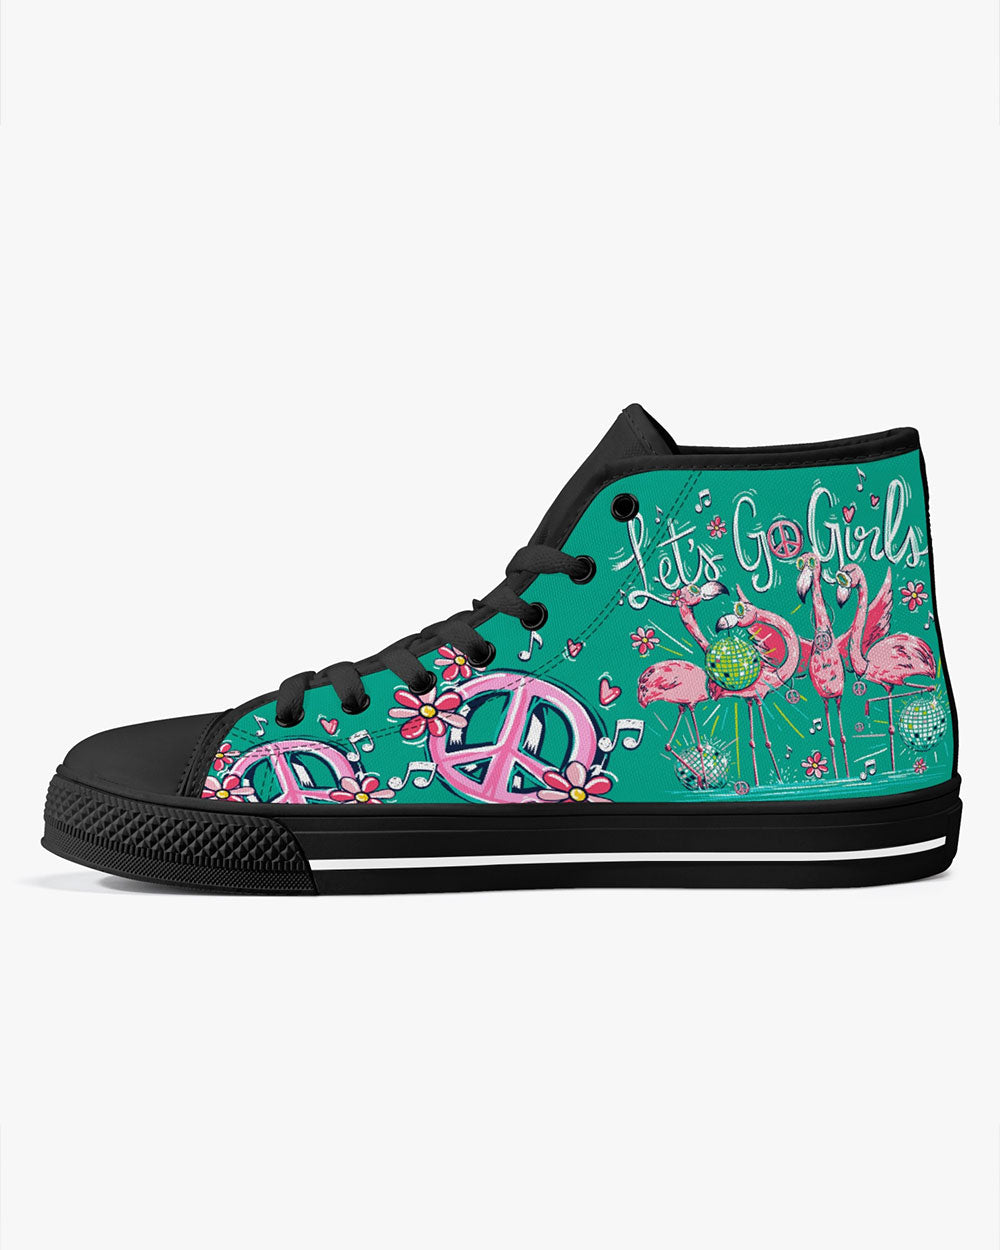 LET'S GO GIRLS FLAMINGO HIGH TOP CANVAS SHOES - TY1906235